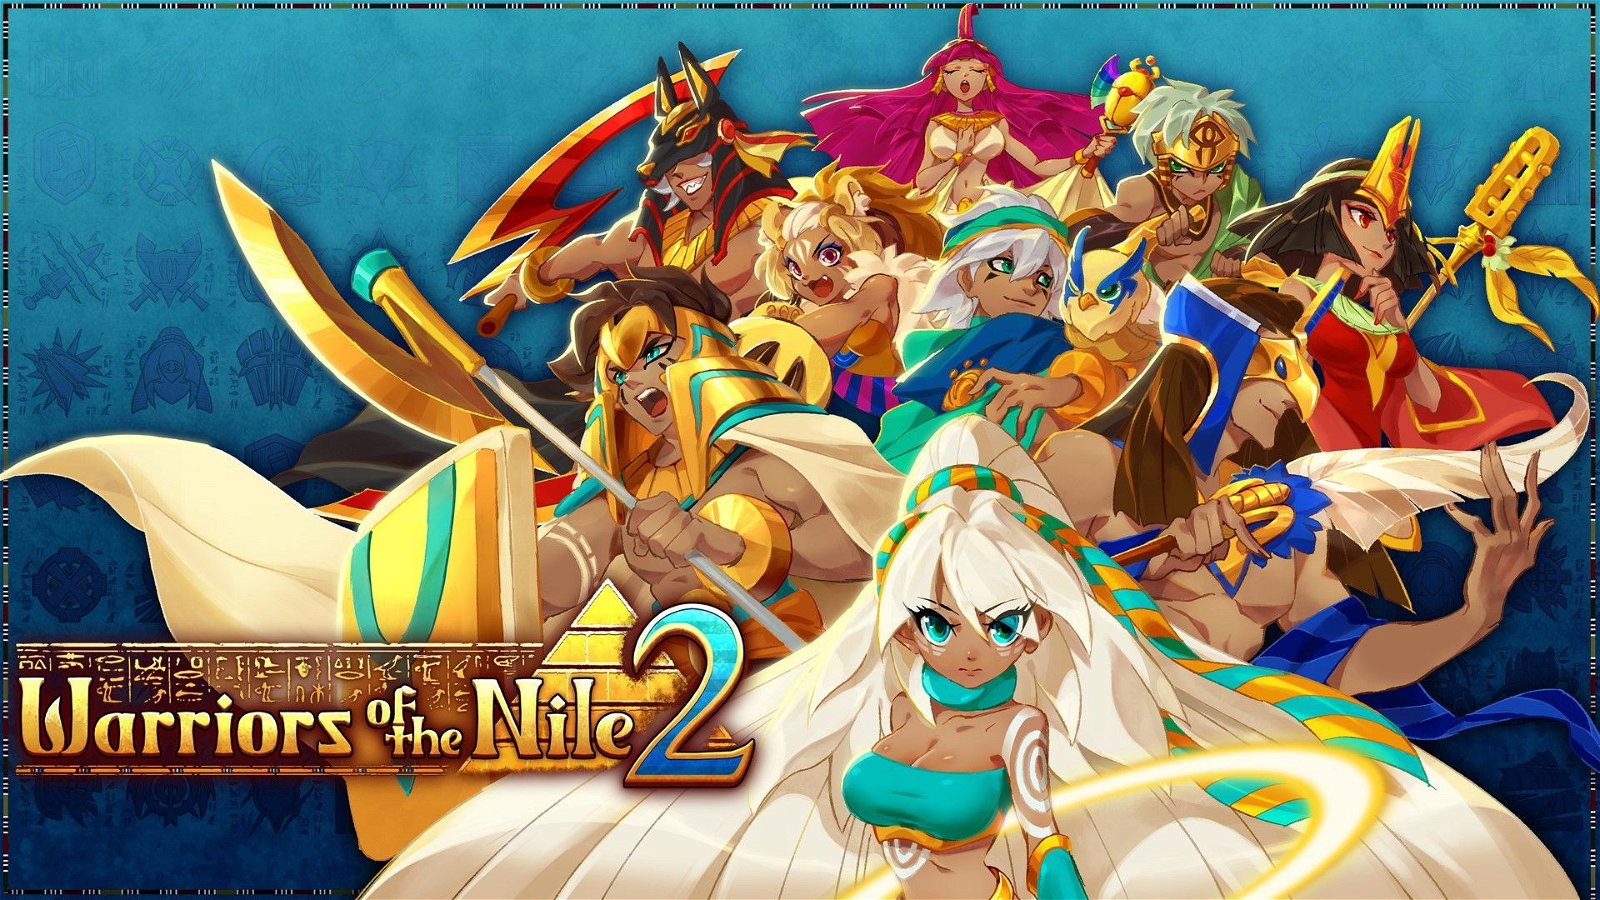 Image of Warriors of the Nile 2